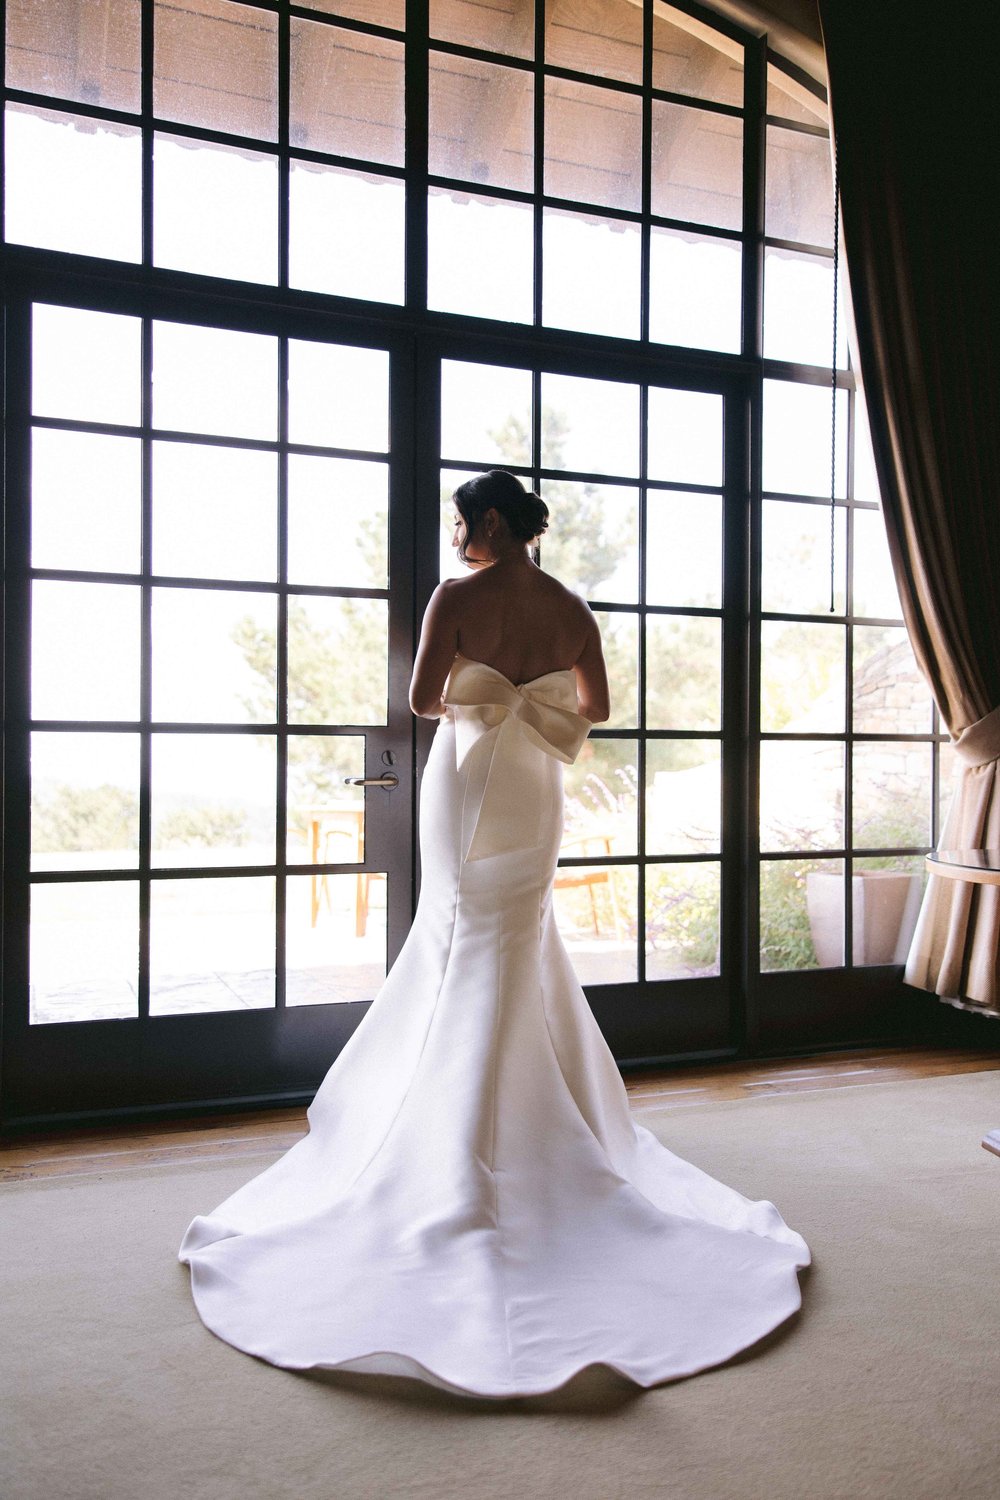 Discover timeless elegance at Tehama Golf Club - the perfect venue for unforgettable celebrations. #TehamaWeddings"